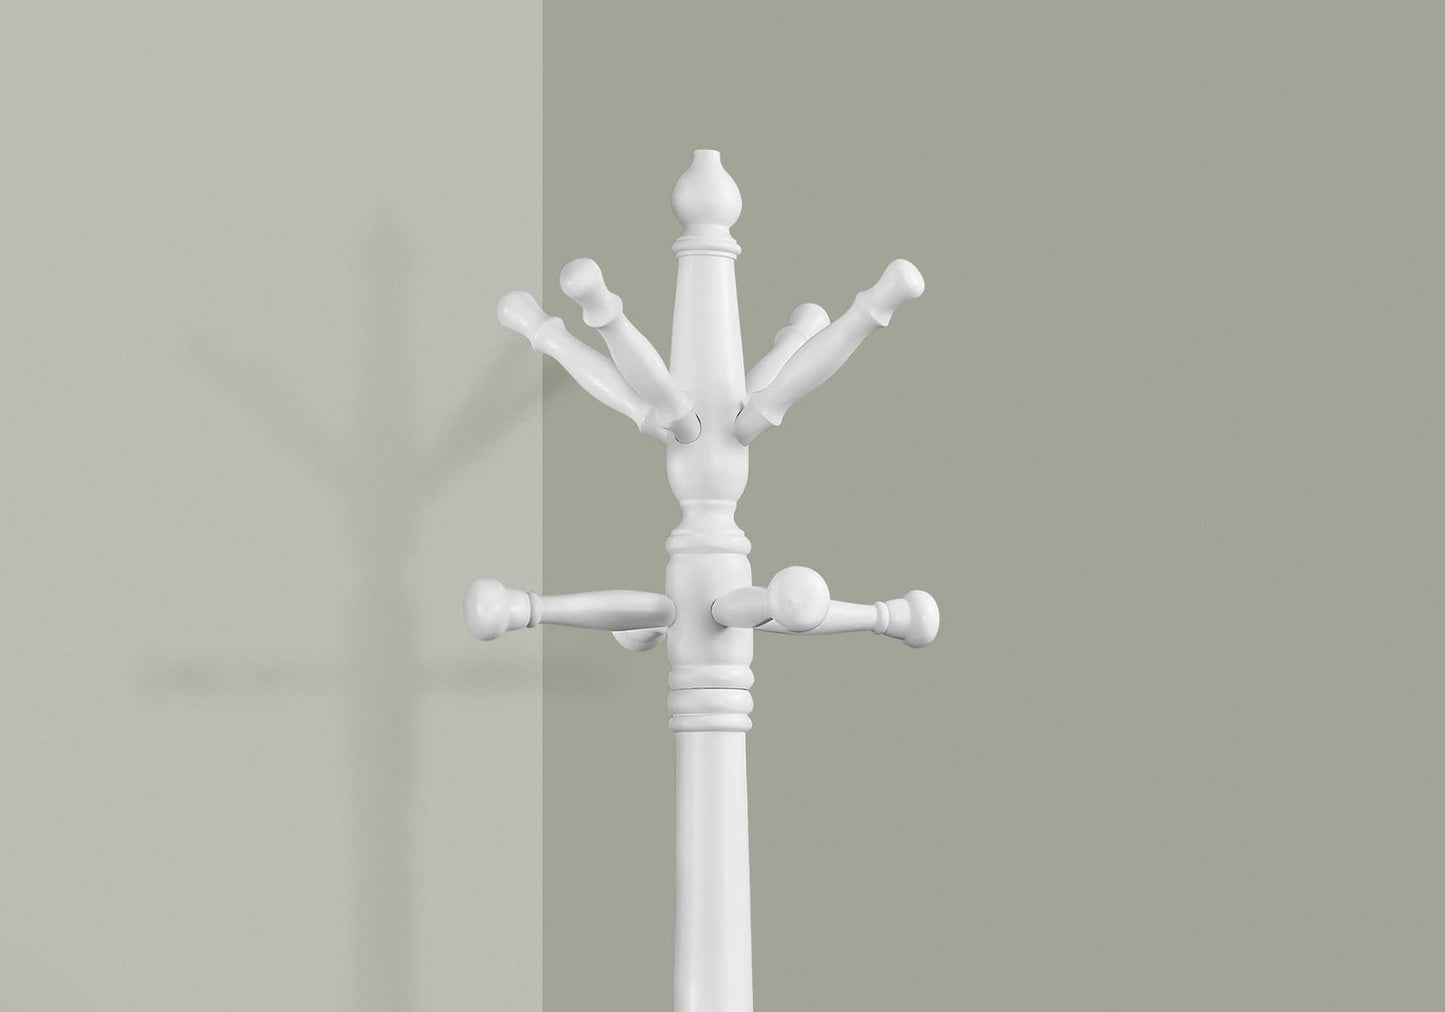 Transitional Traditional 11 Hook Solid Wood Coat Rack in White Finish